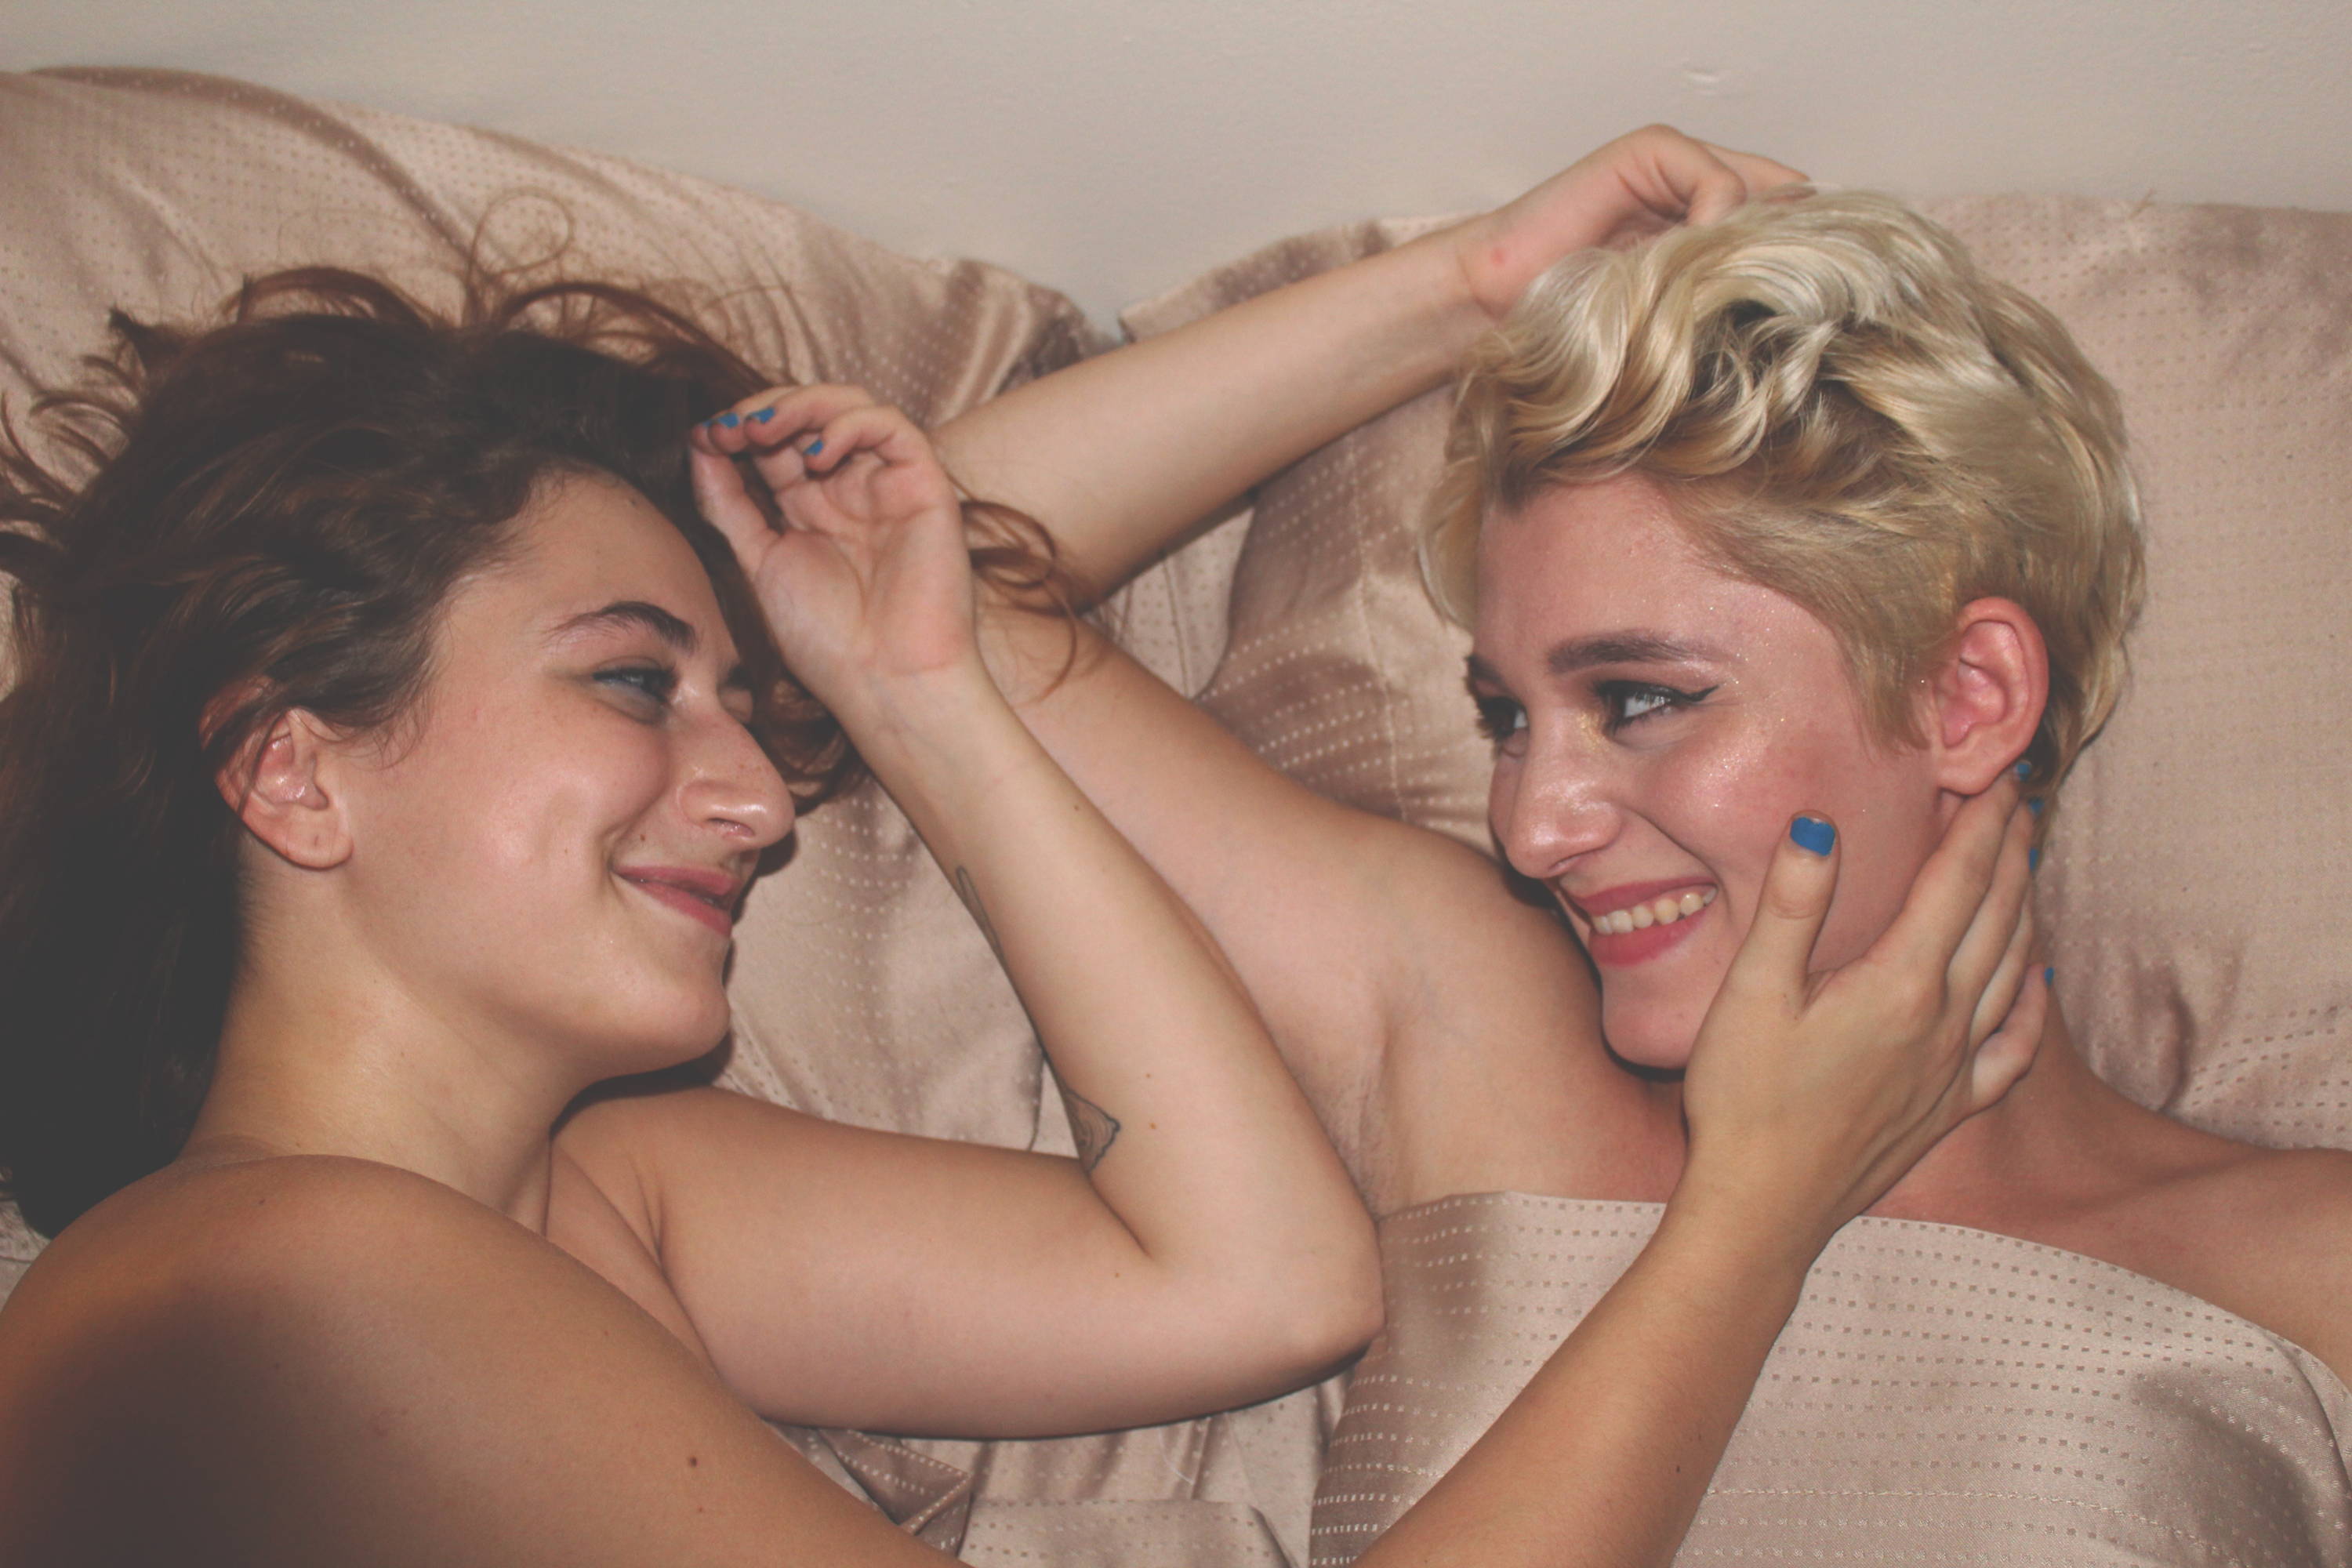 rem-fit is sleeping naked better.  two women in bed smiling